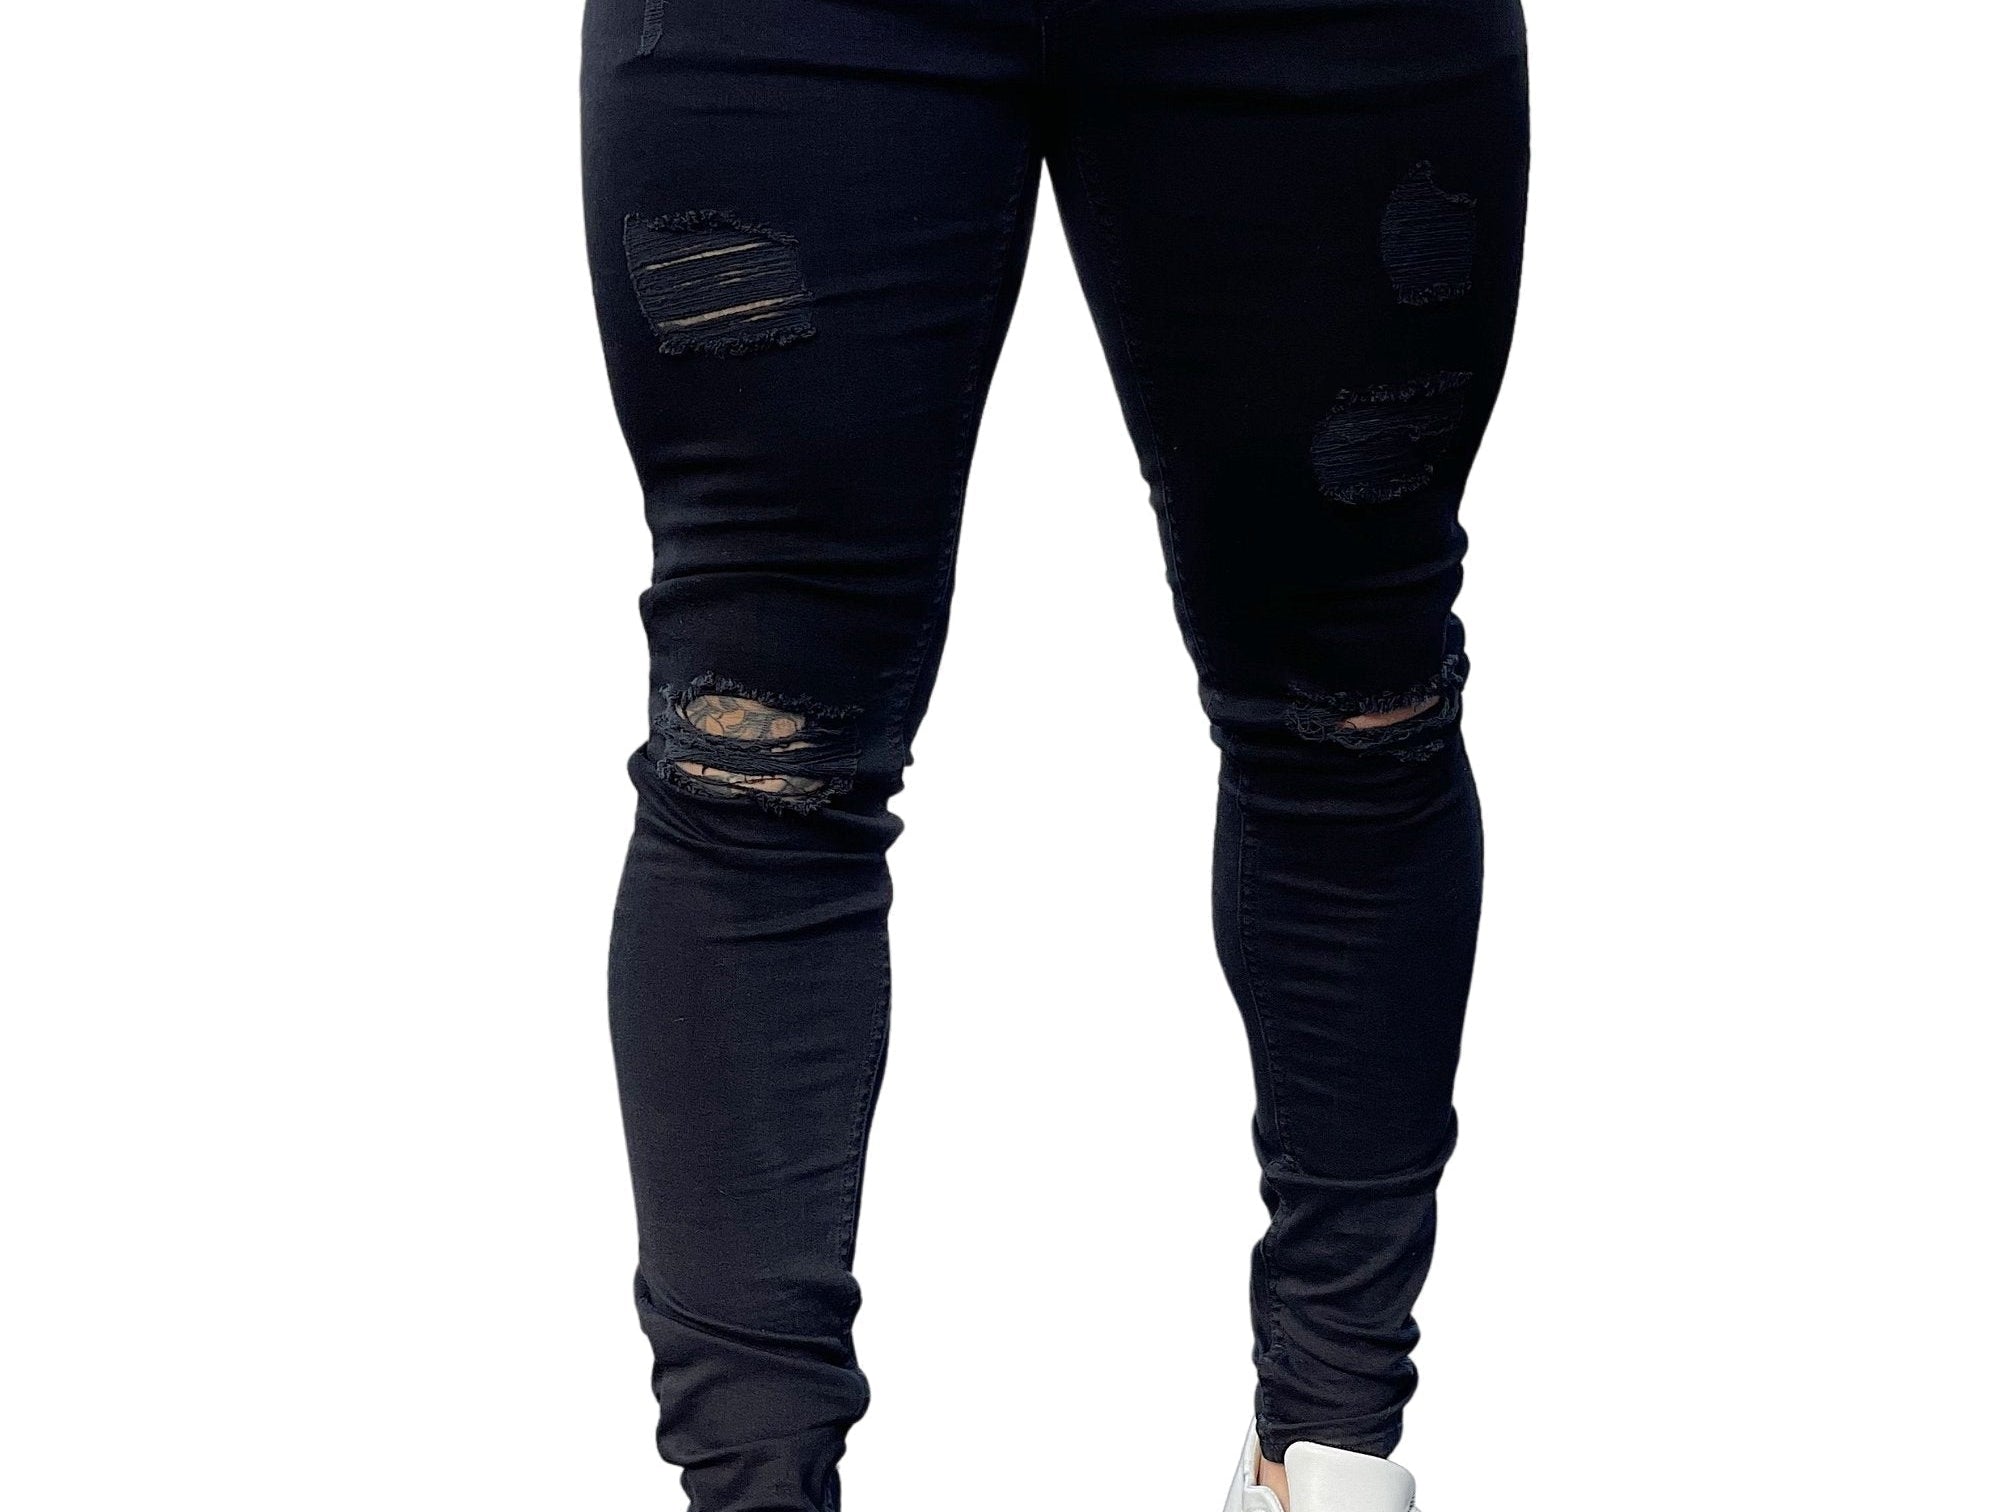 A-life - Black Skinny Jeans for Men (PRE-ORDER DISPATCH DATE 25 September 2024) - Sarman Fashion - Wholesale Clothing Fashion Brand for Men from Canada